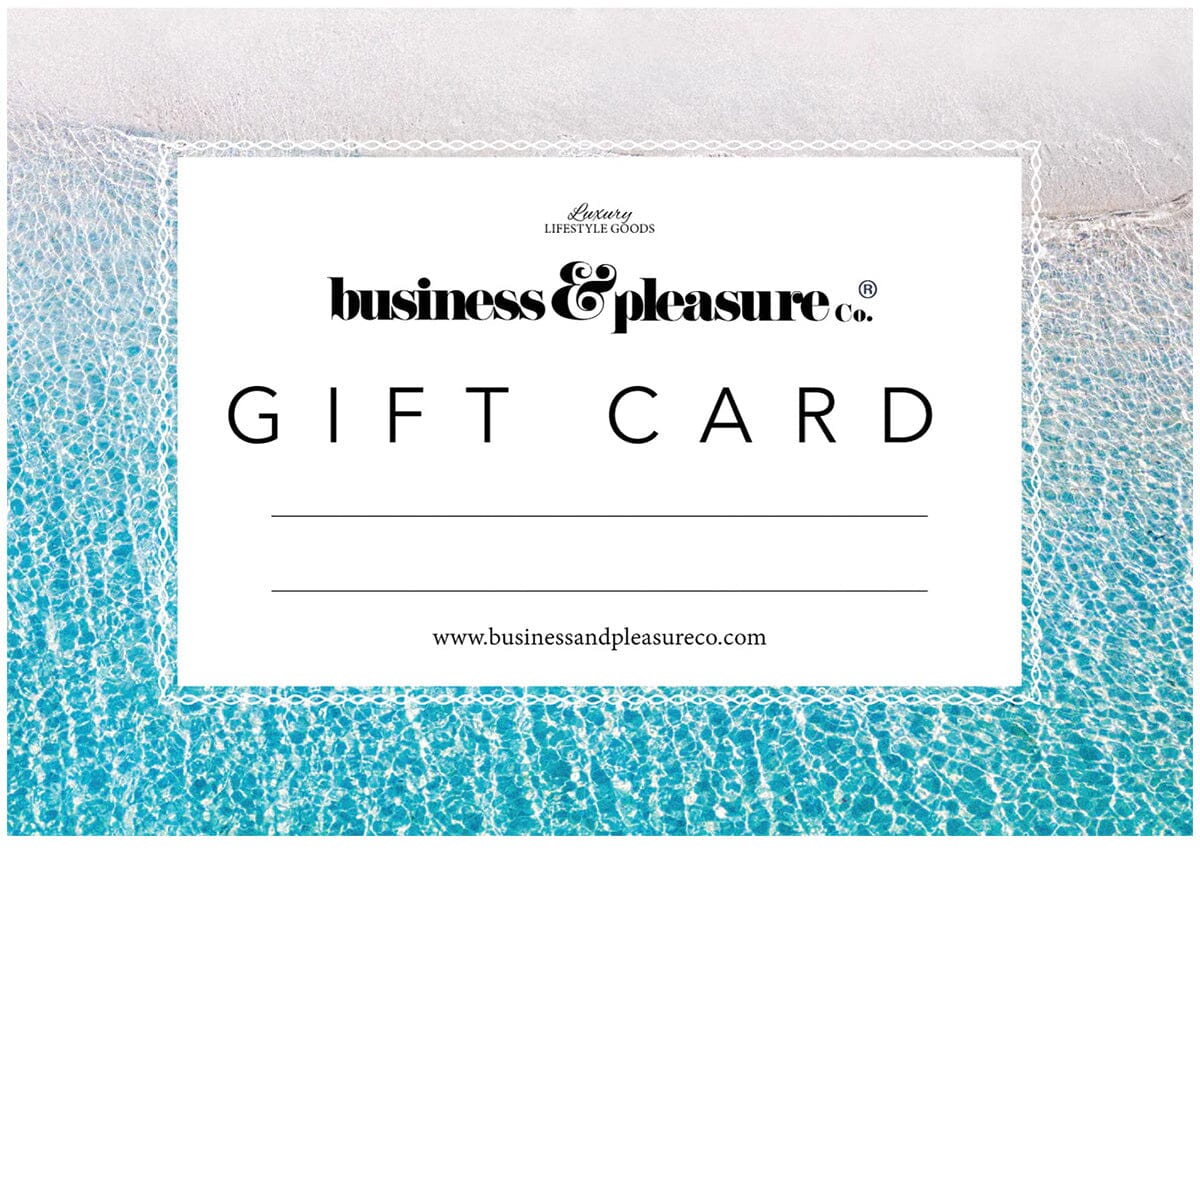 Gift Card Gift Card Business & Pleasure Co 